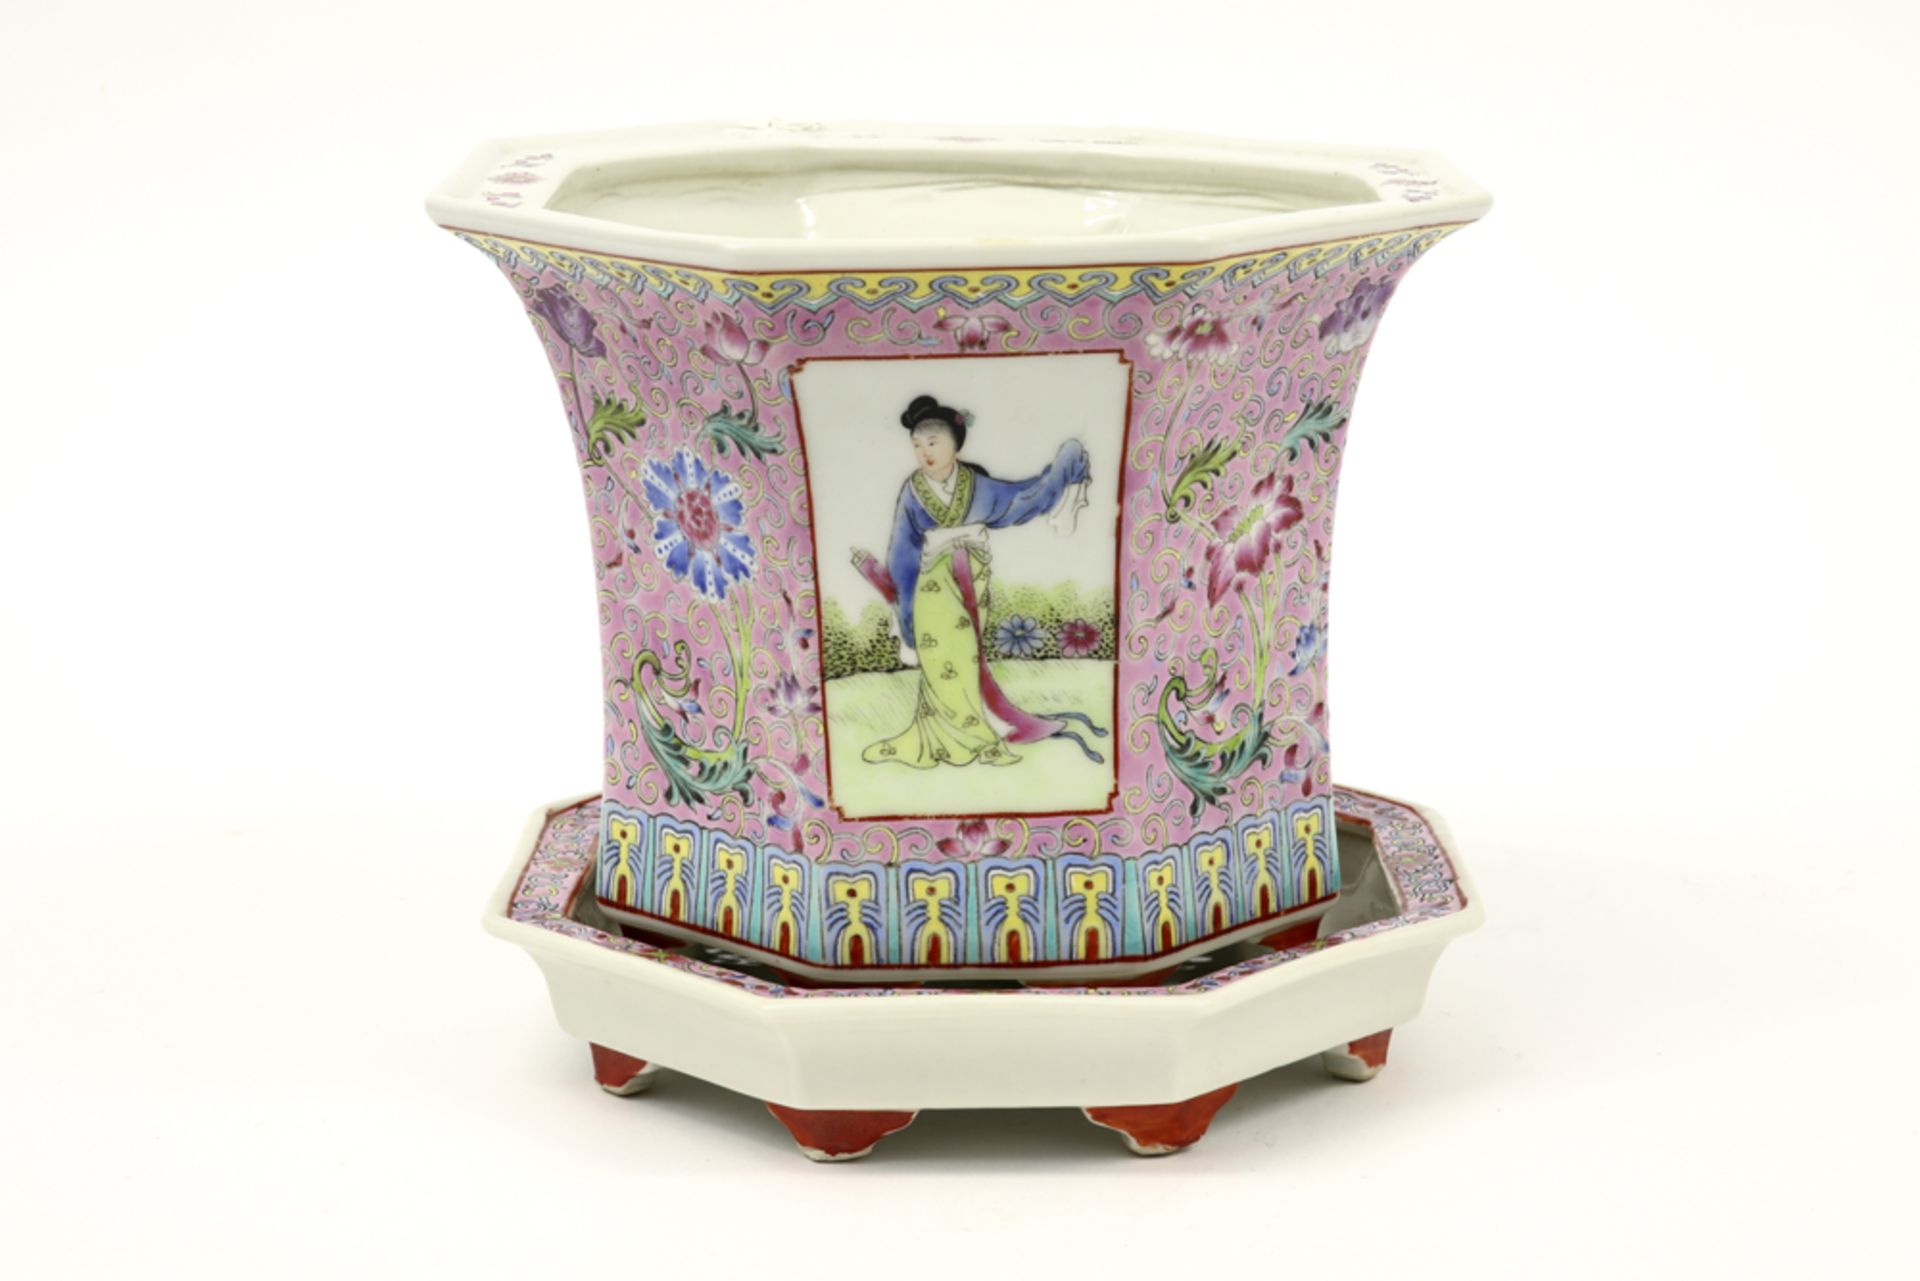 octogonal Chinese jardinier with its dish in marked porcelain with 'Famille Rose' decor with court - Image 4 of 7